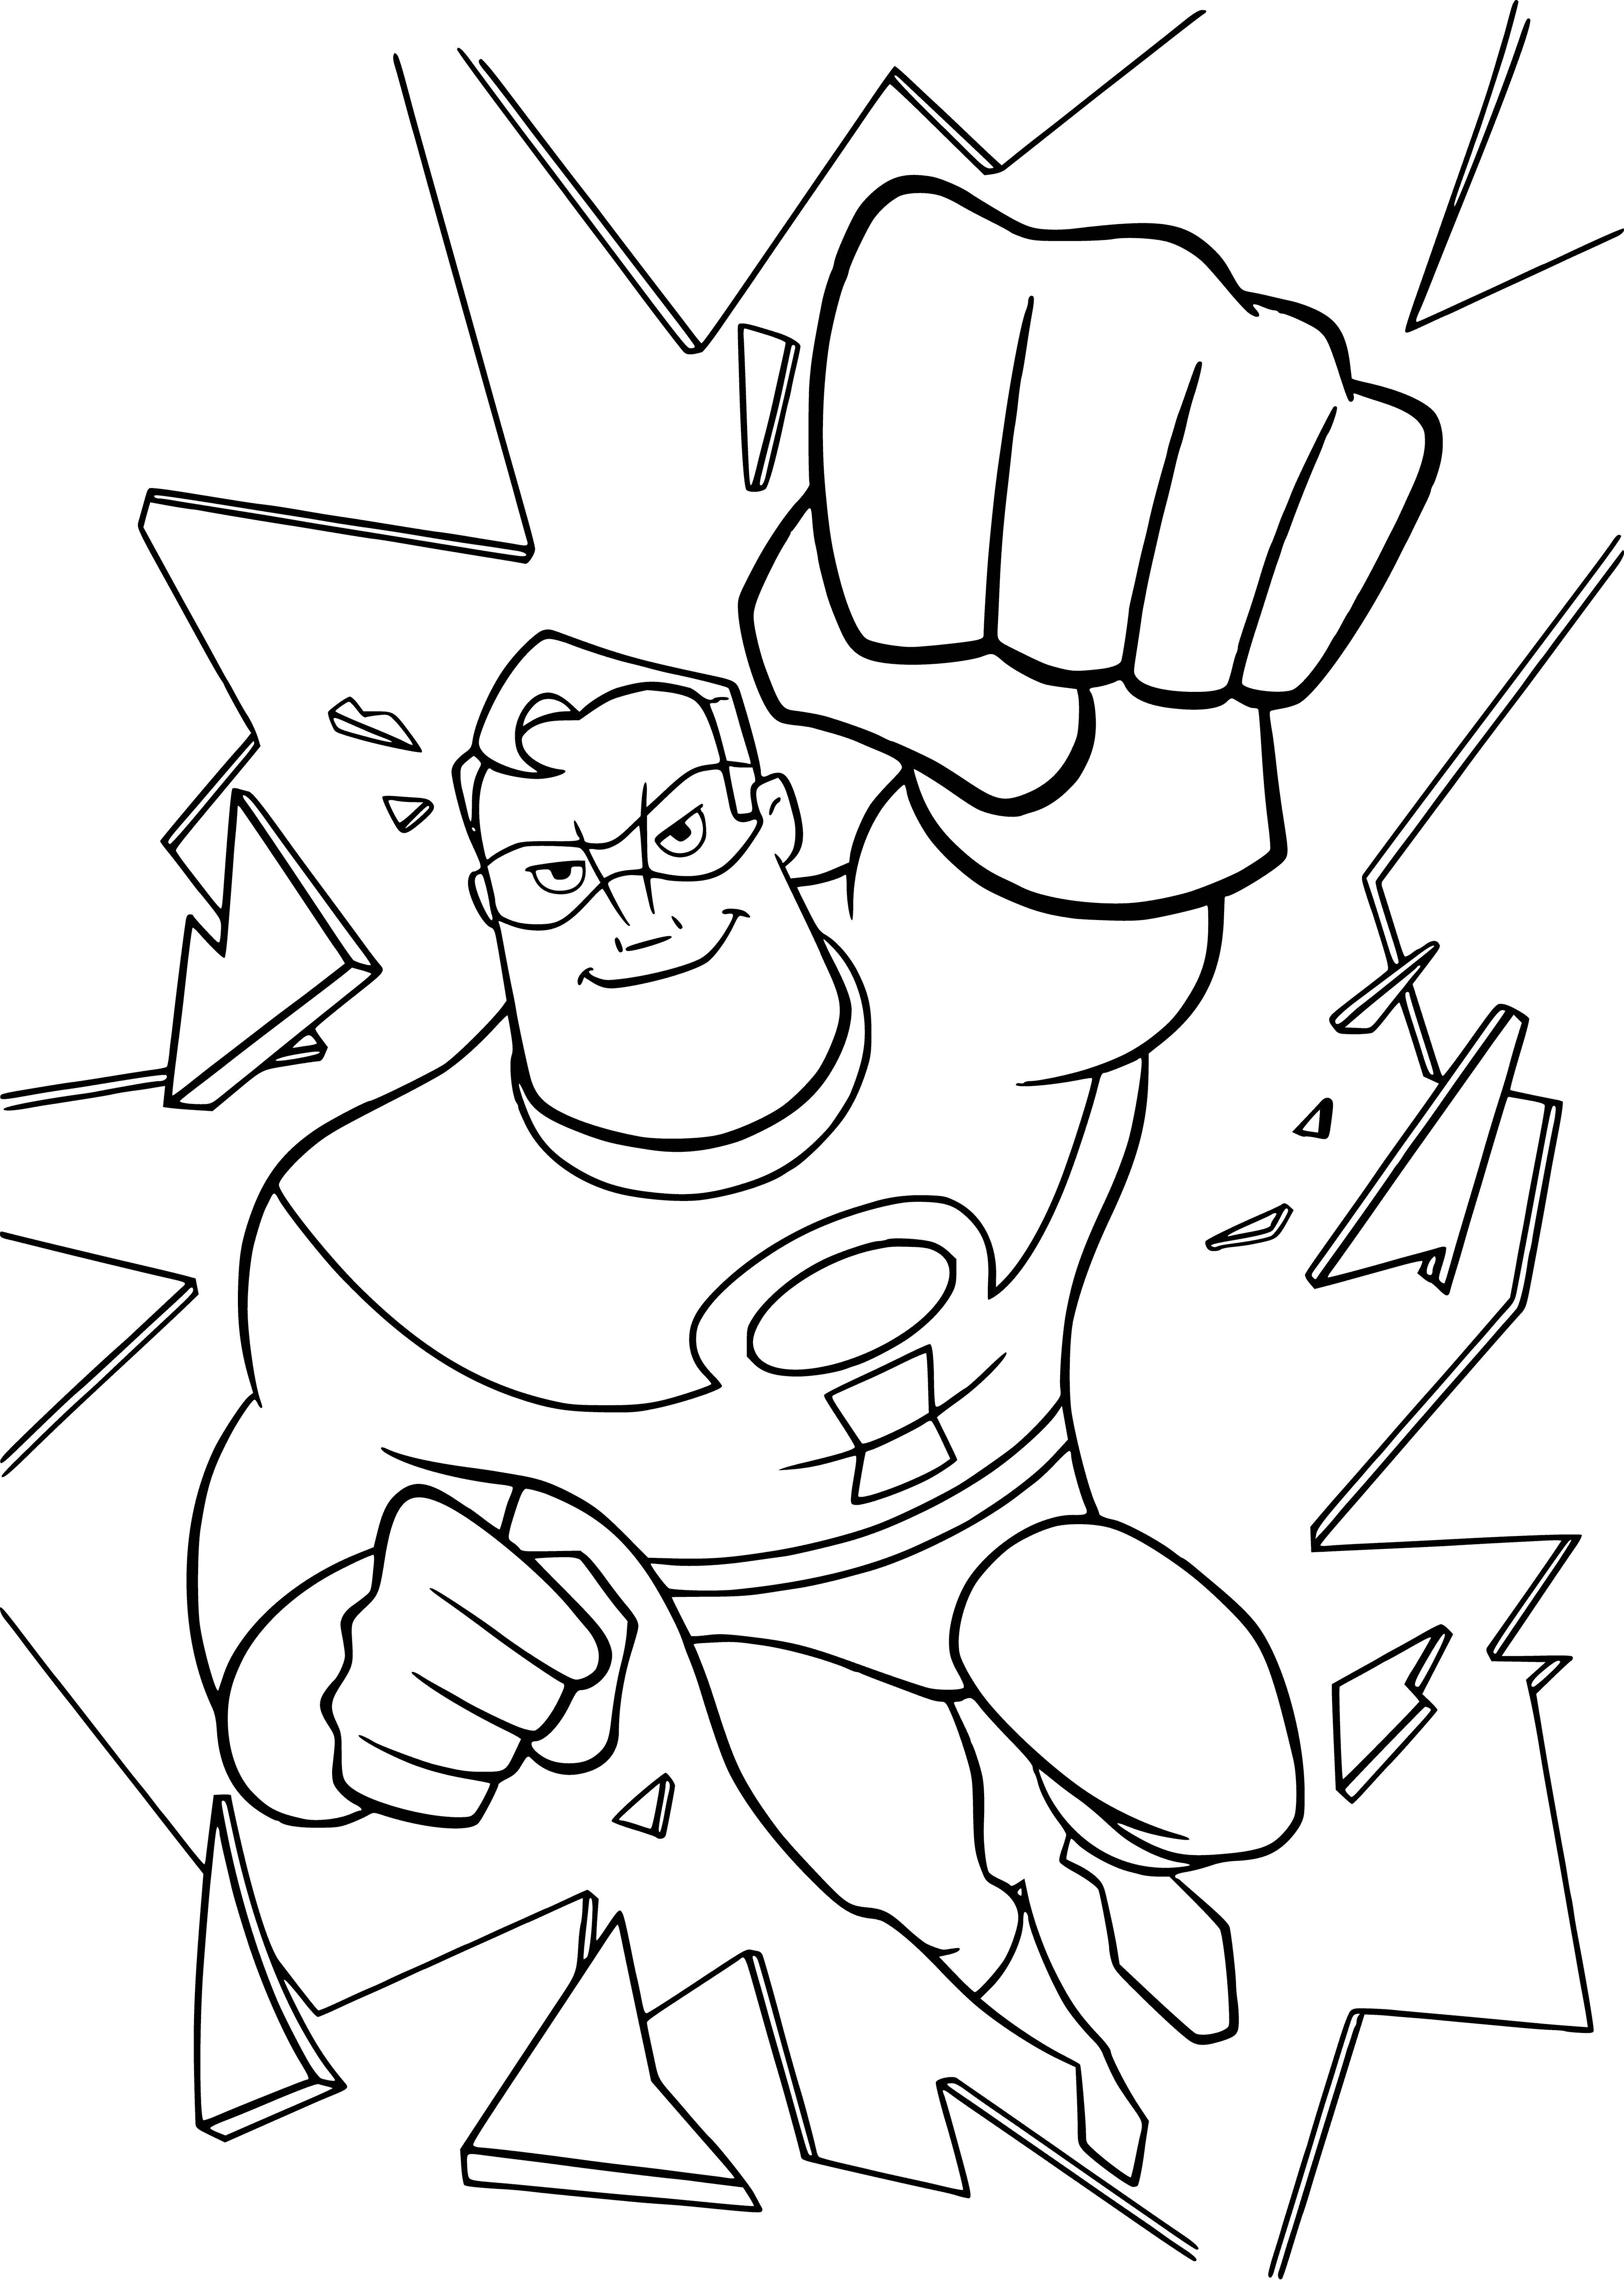 Mister exceptional coloring page